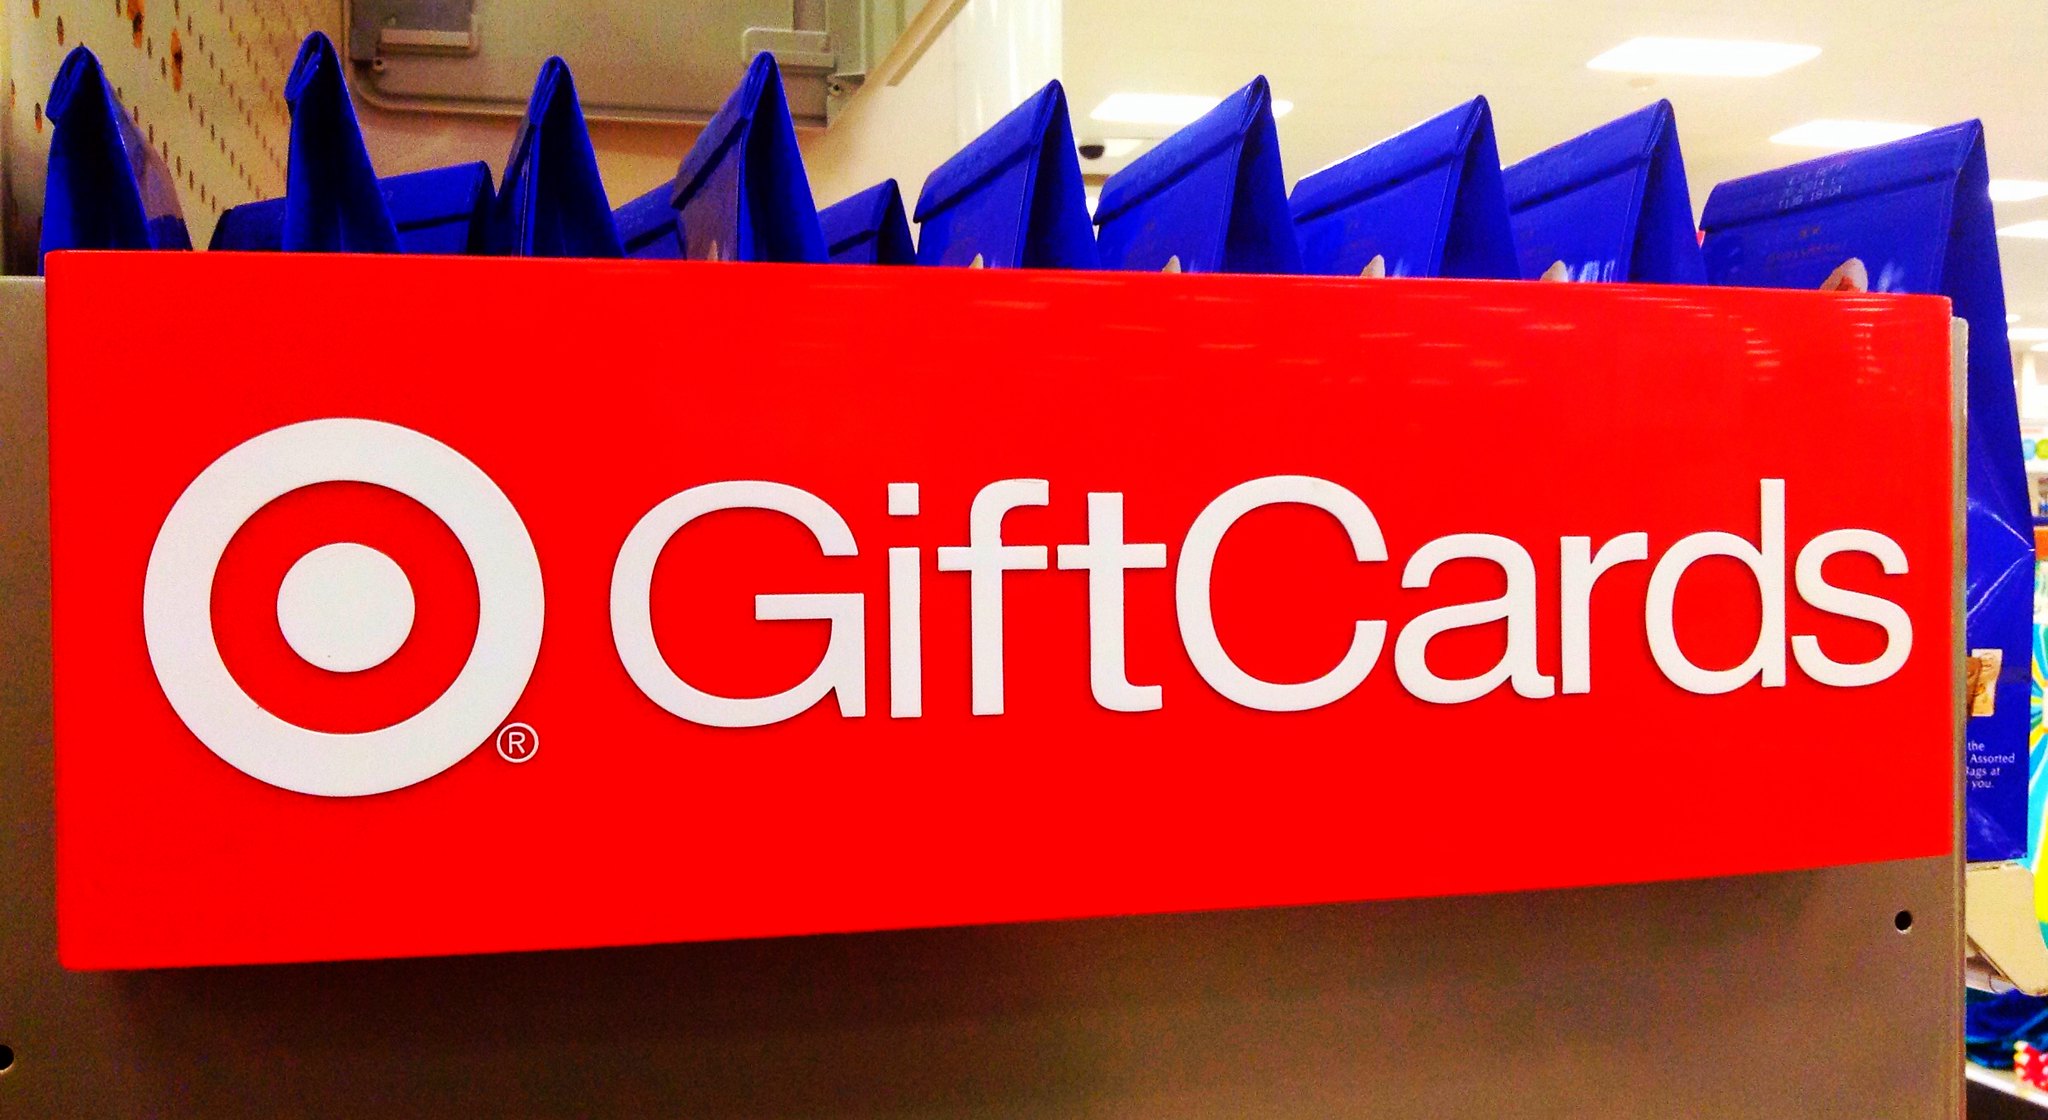 A gift card sign | Source: Flickr. com